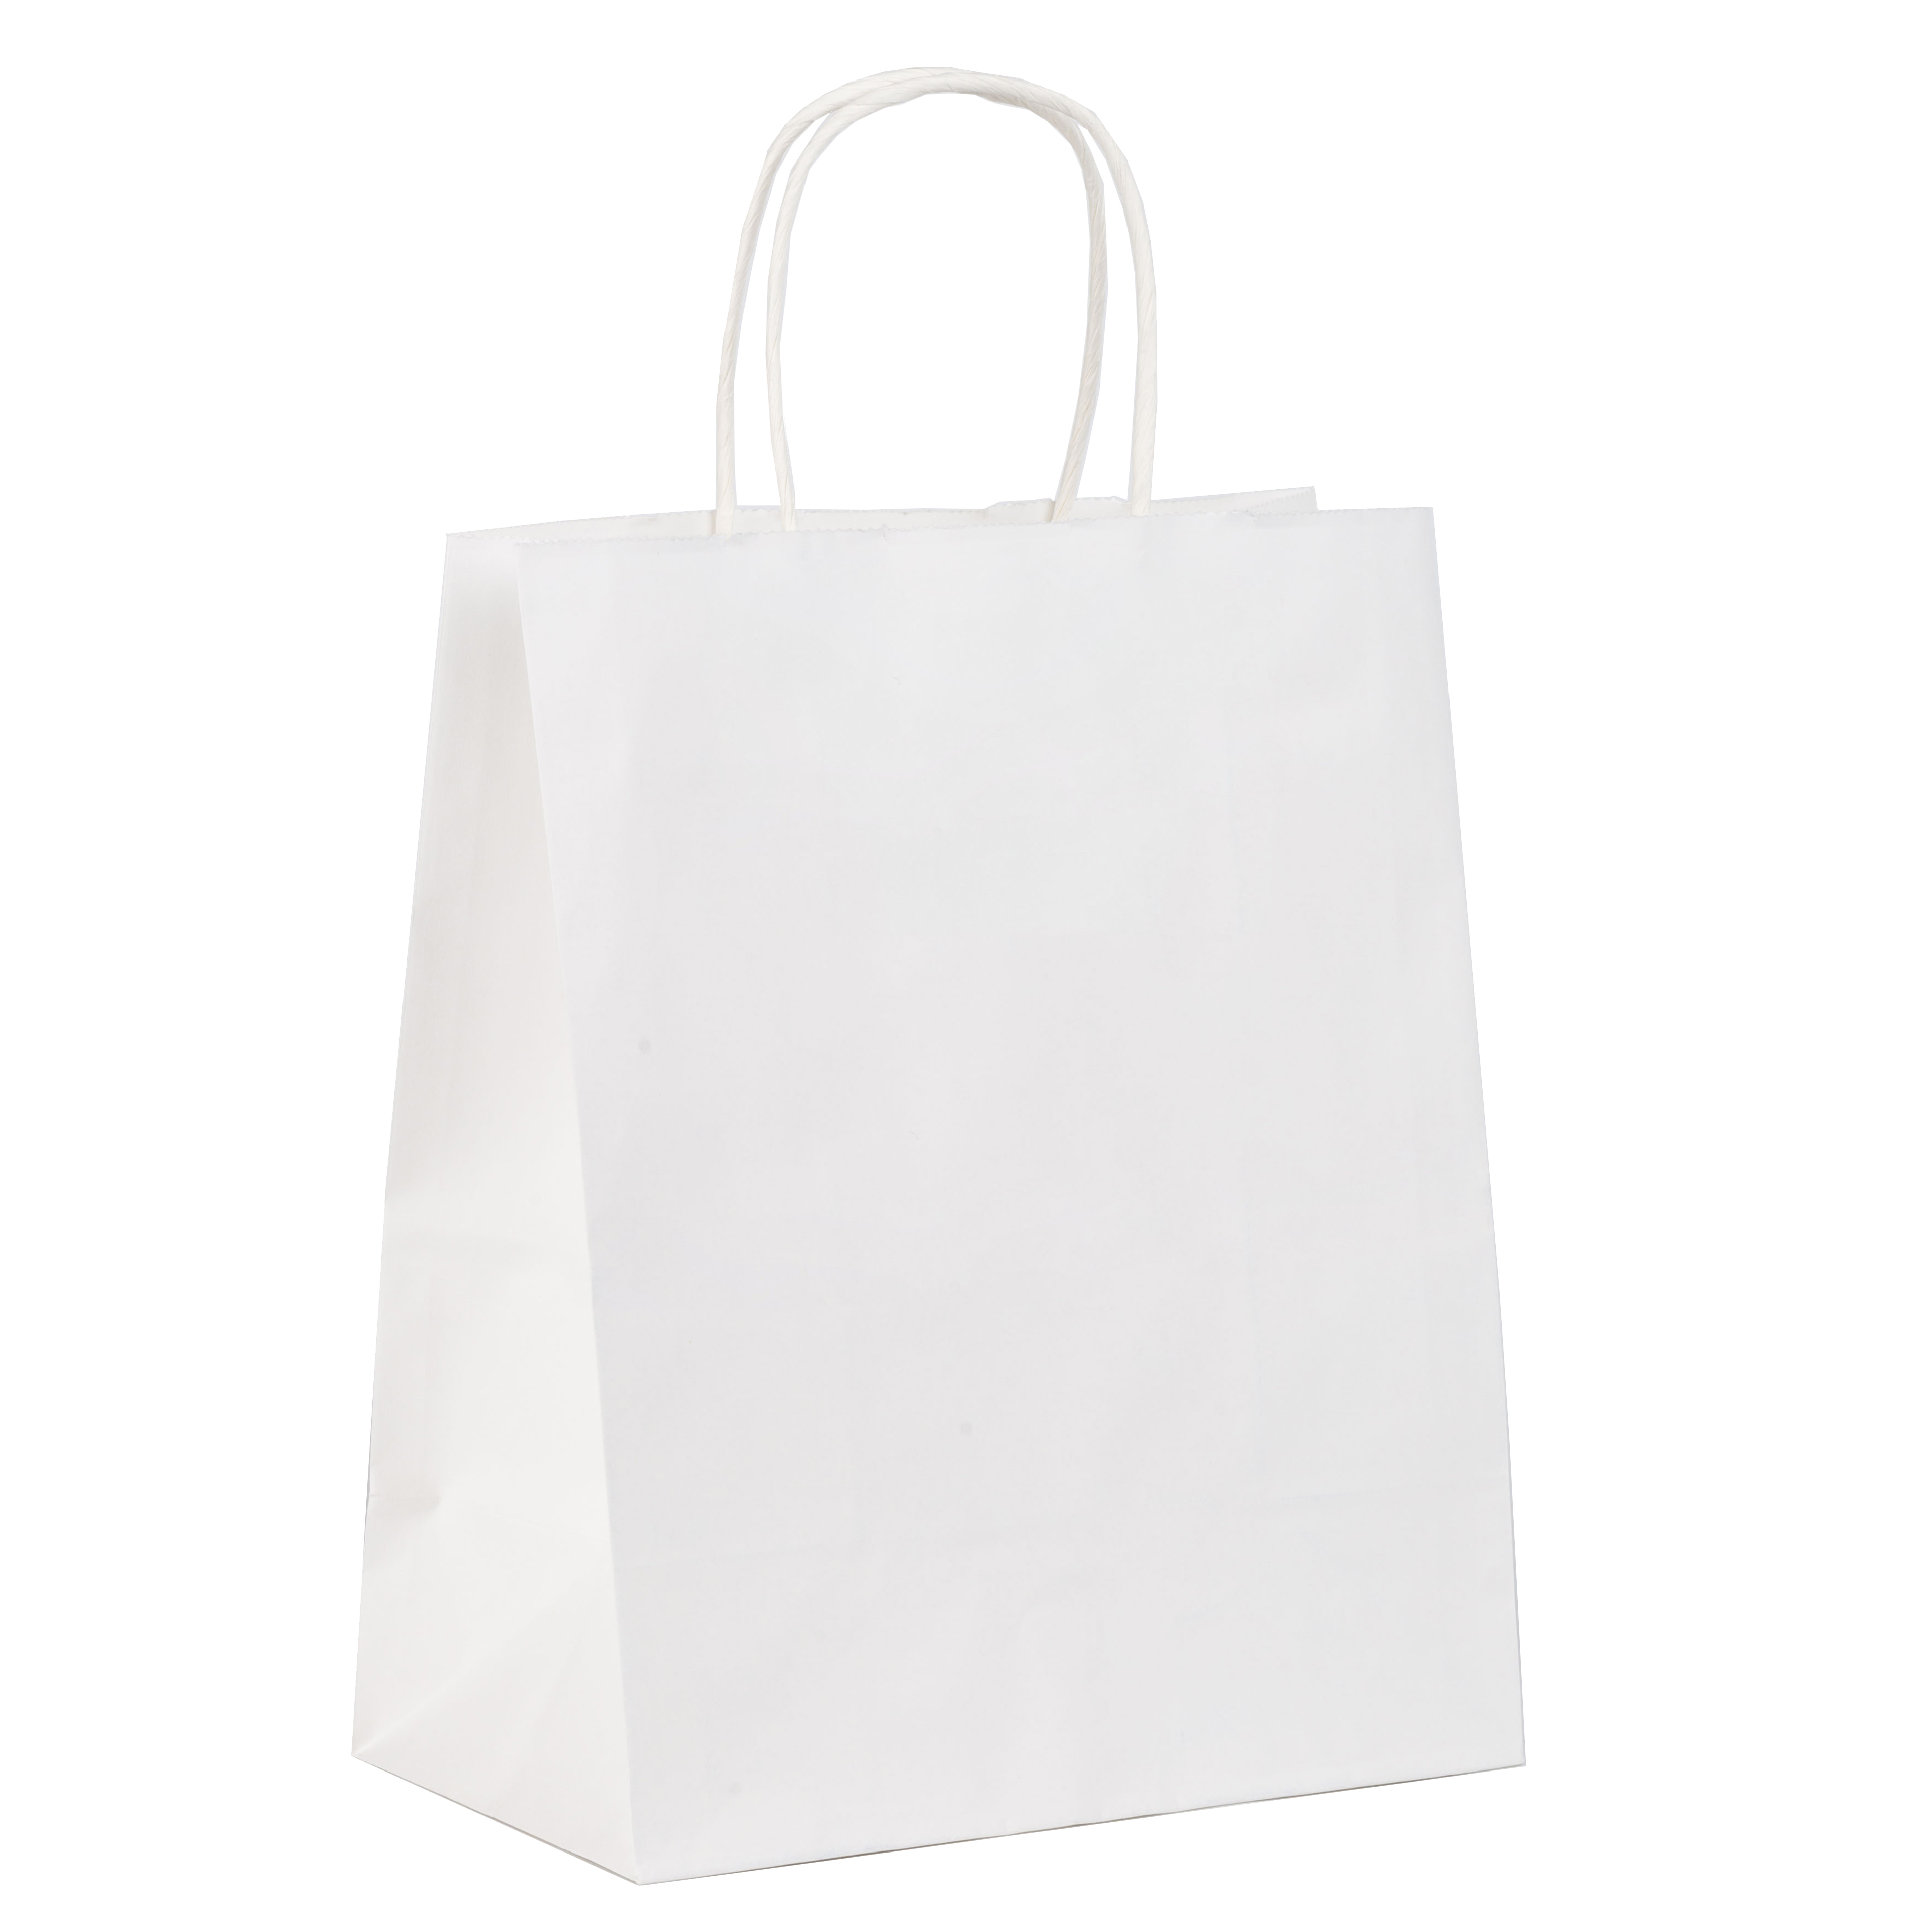 Medium White Twist Handle Bags with Serrated Top 